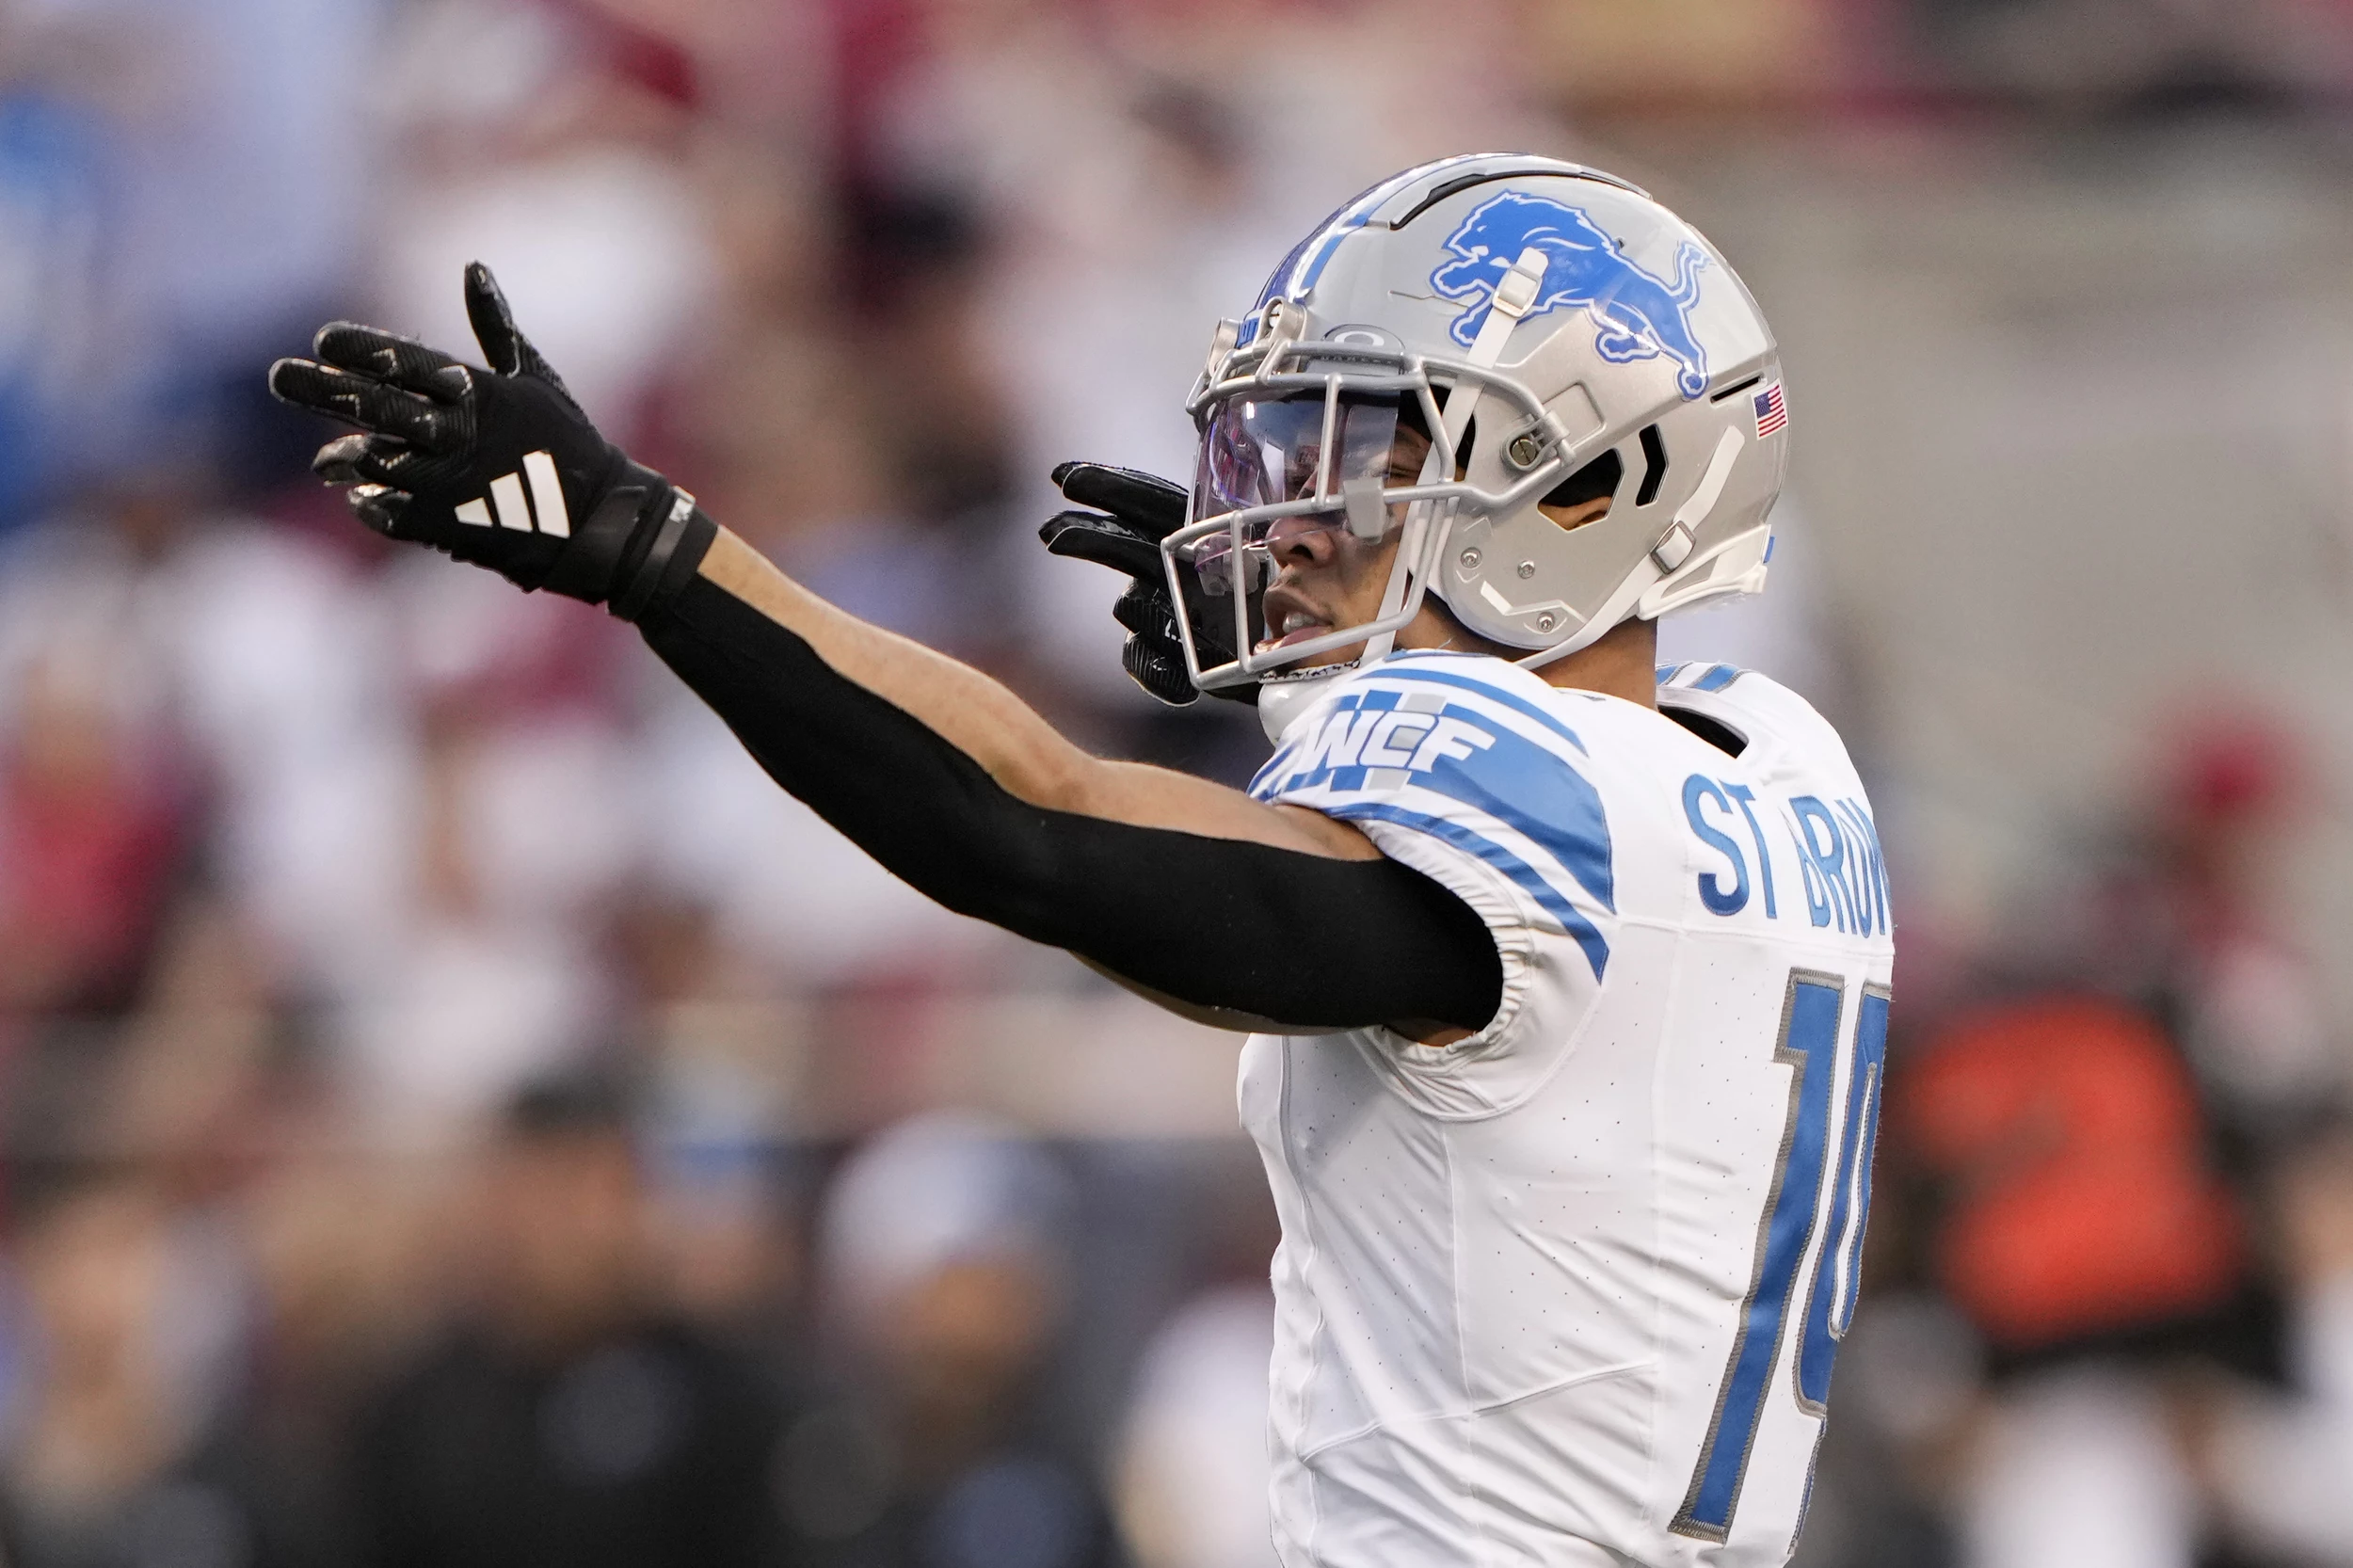 NFL News: Detriot Lions Lock Down Amon-Ra St. Brown As NFL’s Top-Earning Wide Receiver At $120,000,000 For 4 Years